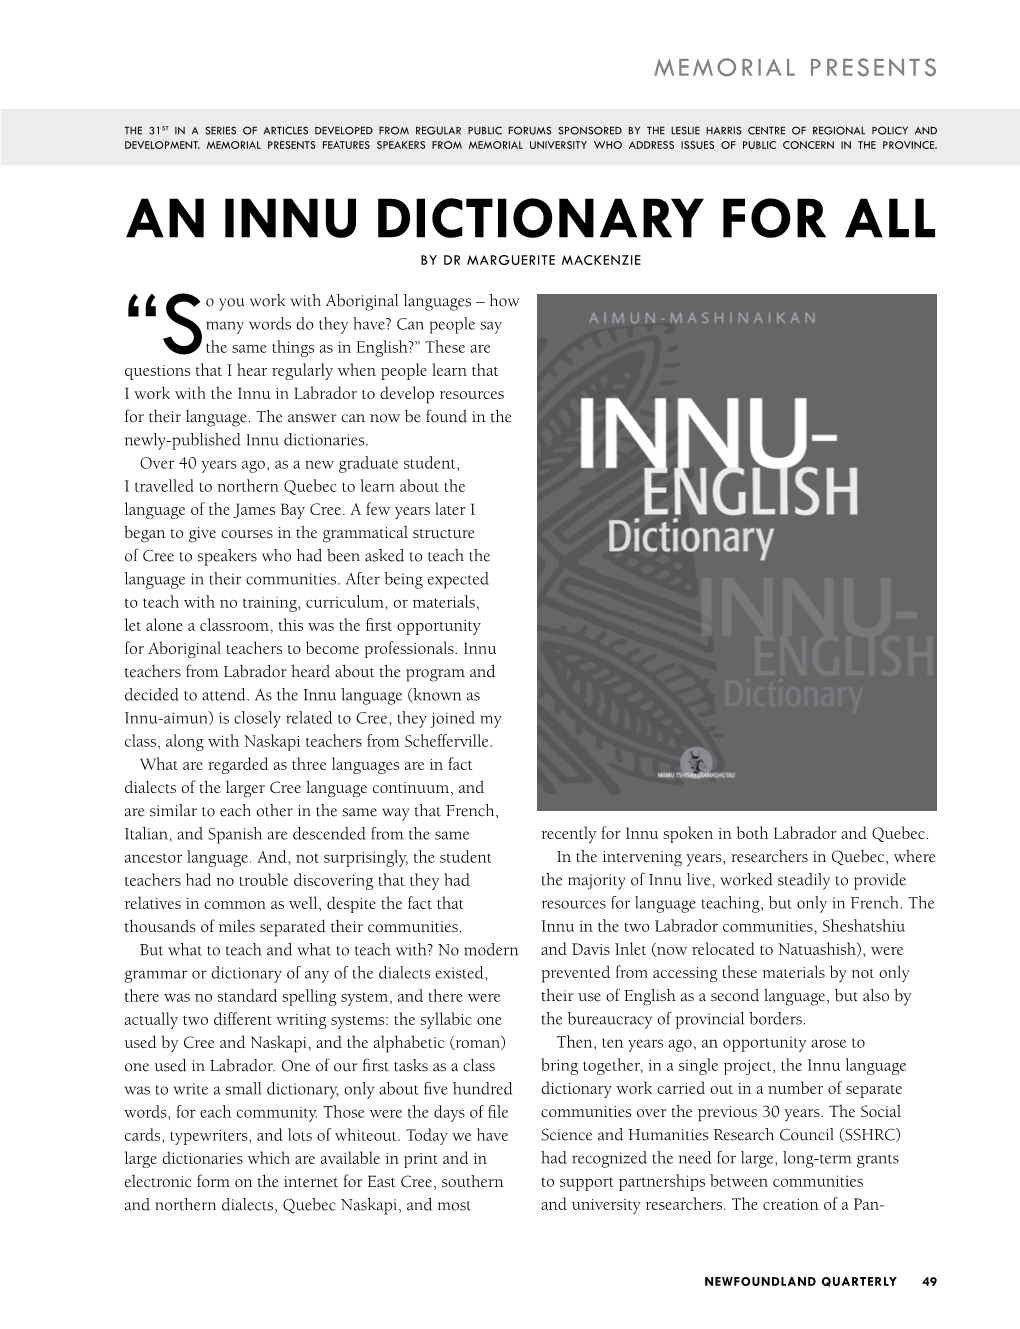 An Innu Dictionary for All by Dr Marguerite Mackenzie